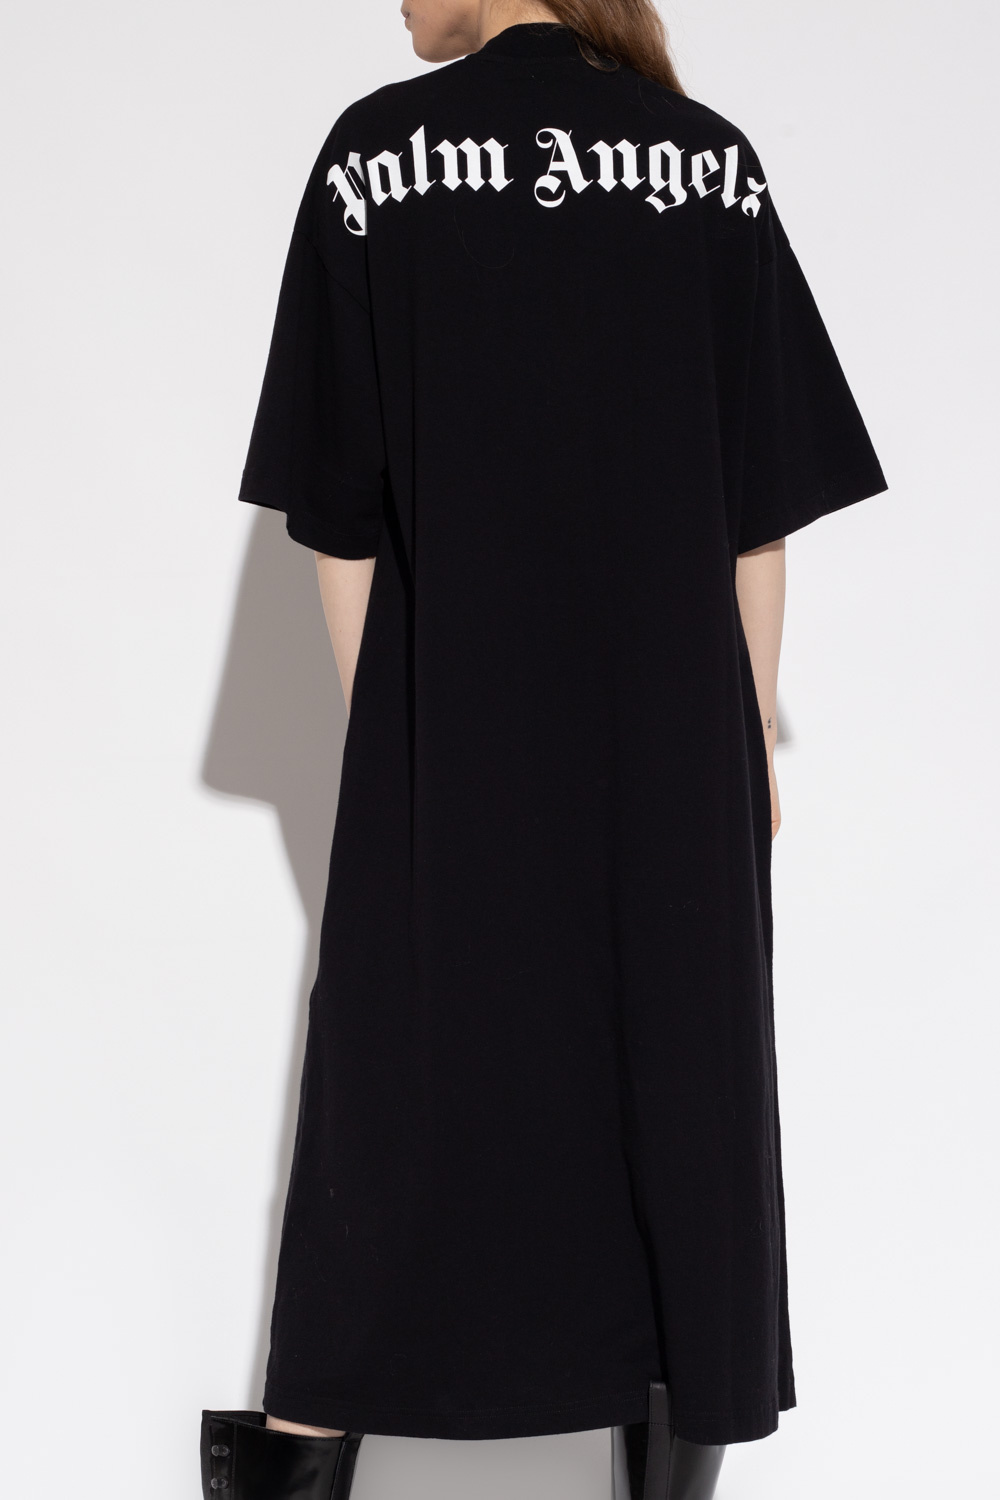 Logo Rib Dress in black - Palm Angels® Official